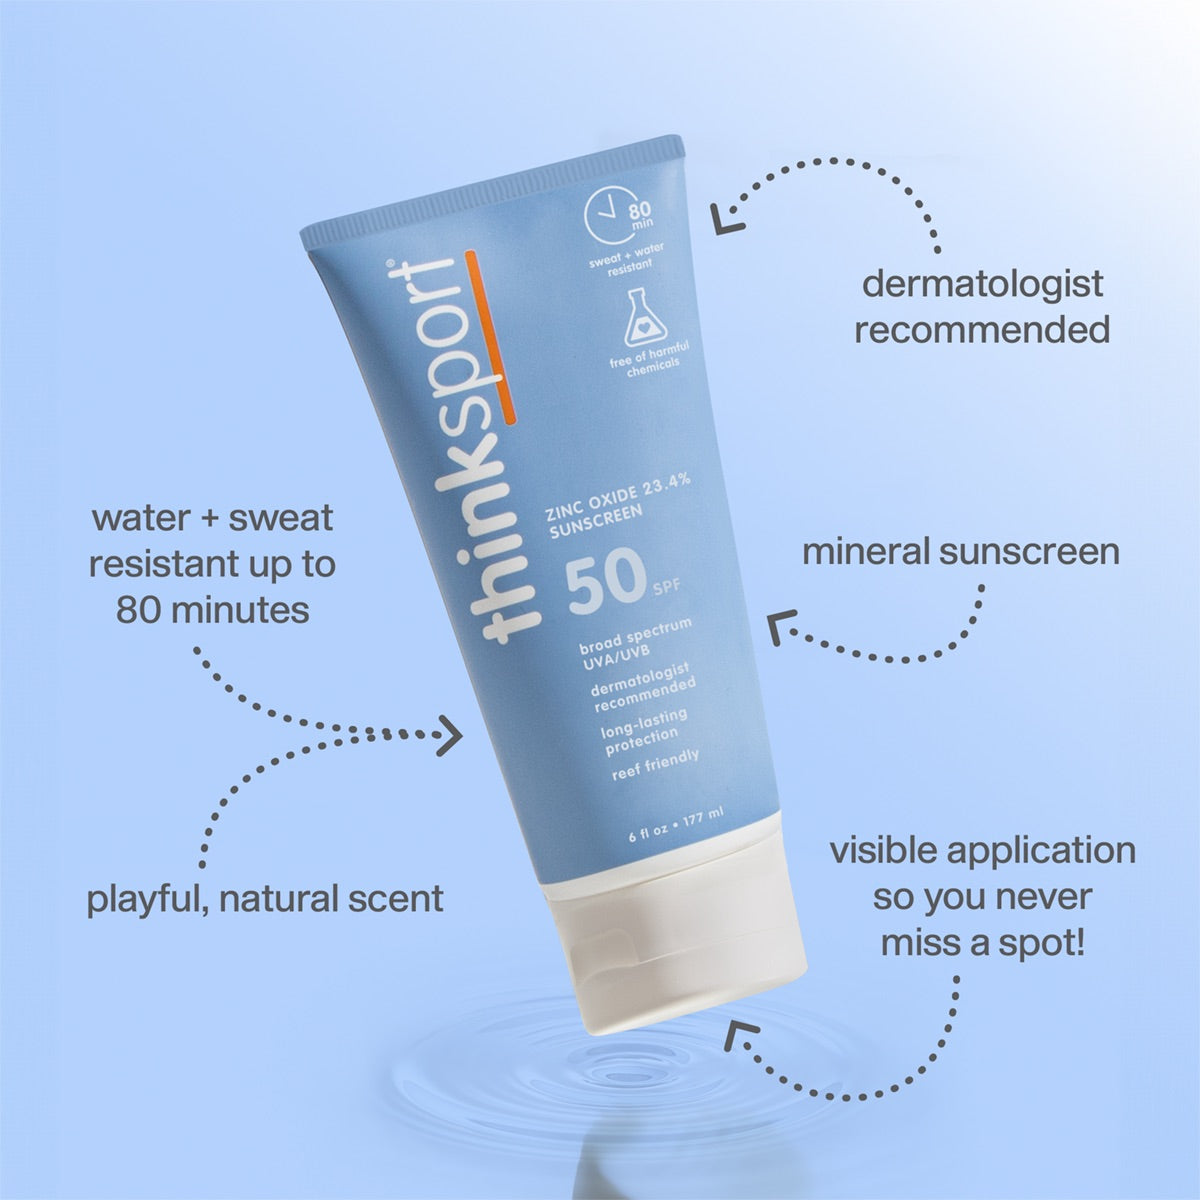 Image of a ThinkSport SPF 50 sunscreen tube with visual annotations for water and sweat resistance, dermatologist recommended, mineral sunscreen, and playful natural scent.